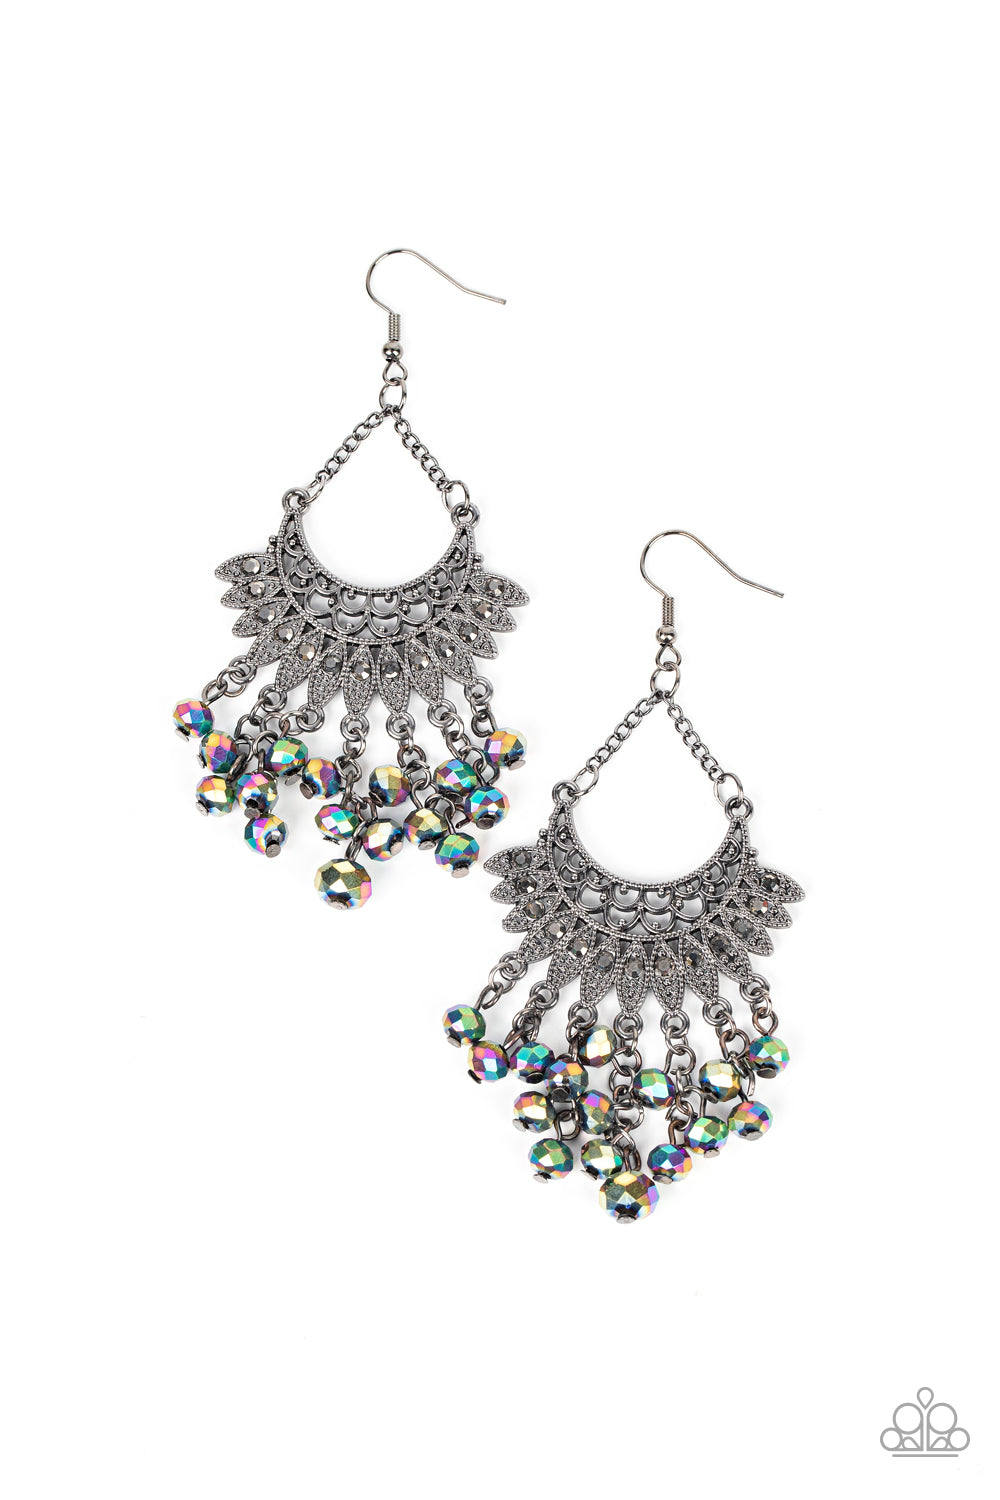 Chromatic Cascade - Multi Color - Oil Spill Earrings - Paparazzi Accessories - Tassels of metallic oil spill crystal-like beads cascade from the bottom of a fan of hematite rhinestone dotted frames that flare out from a filigree filled half moon frame, resulting in a glitzy fringe suspended by dainty gunmetal chains.